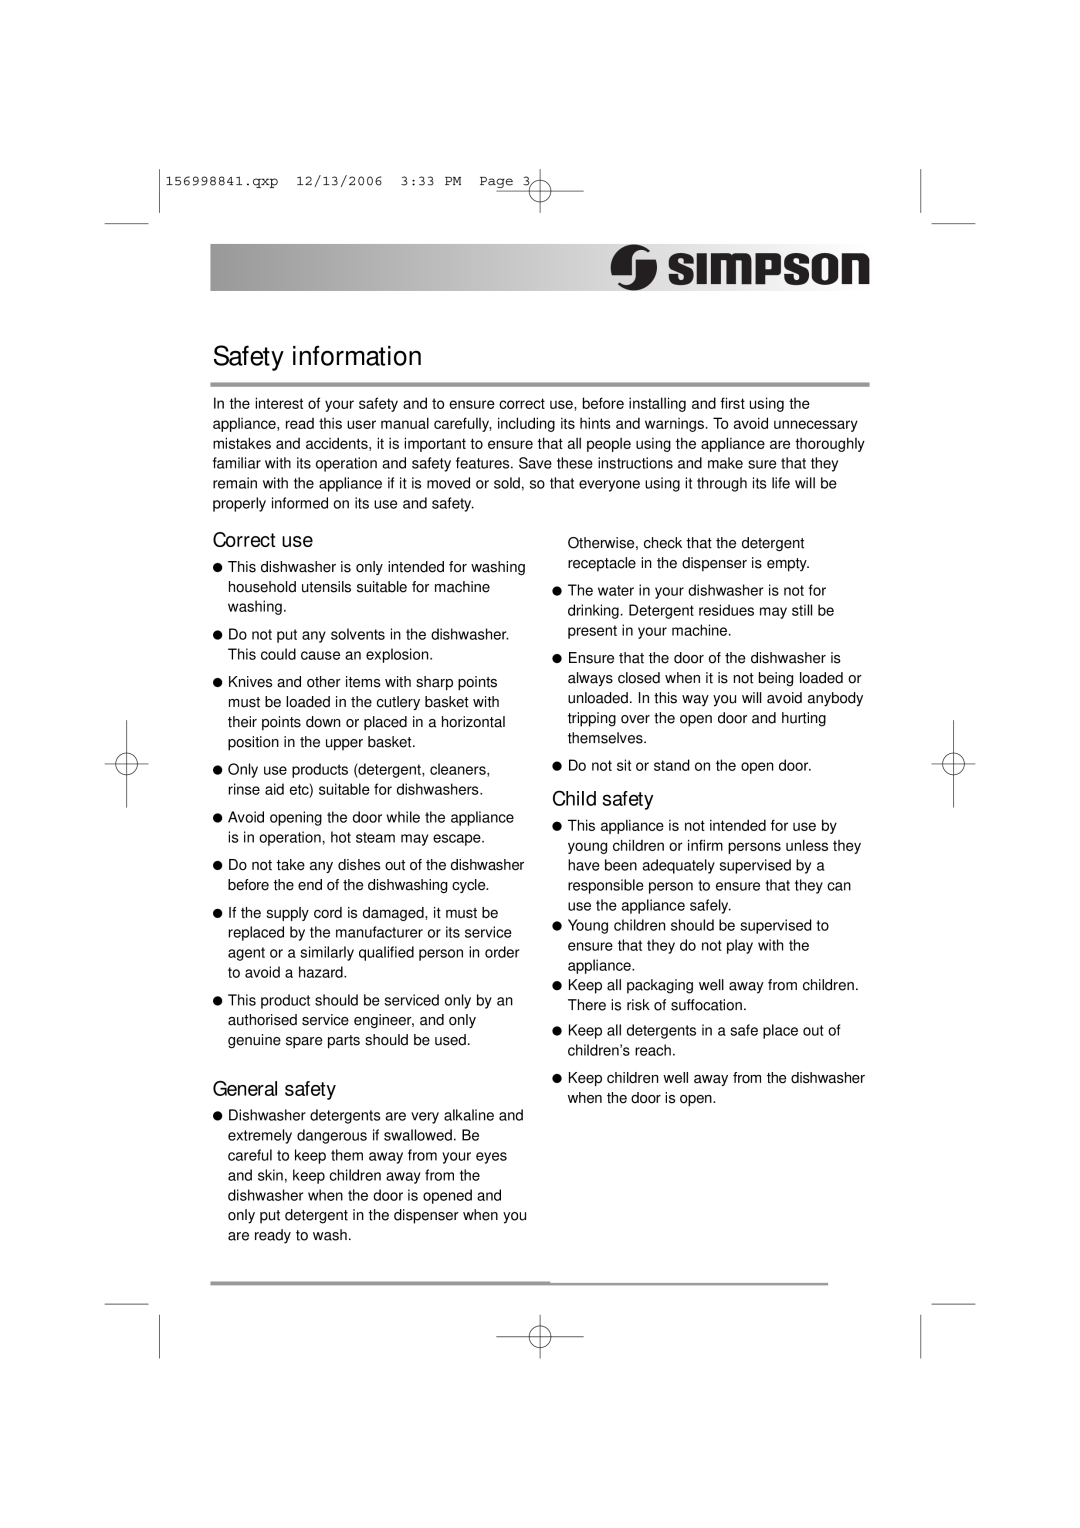 Simpson 52C850 user manual Safety information, Correct use, General safety, Child safety 